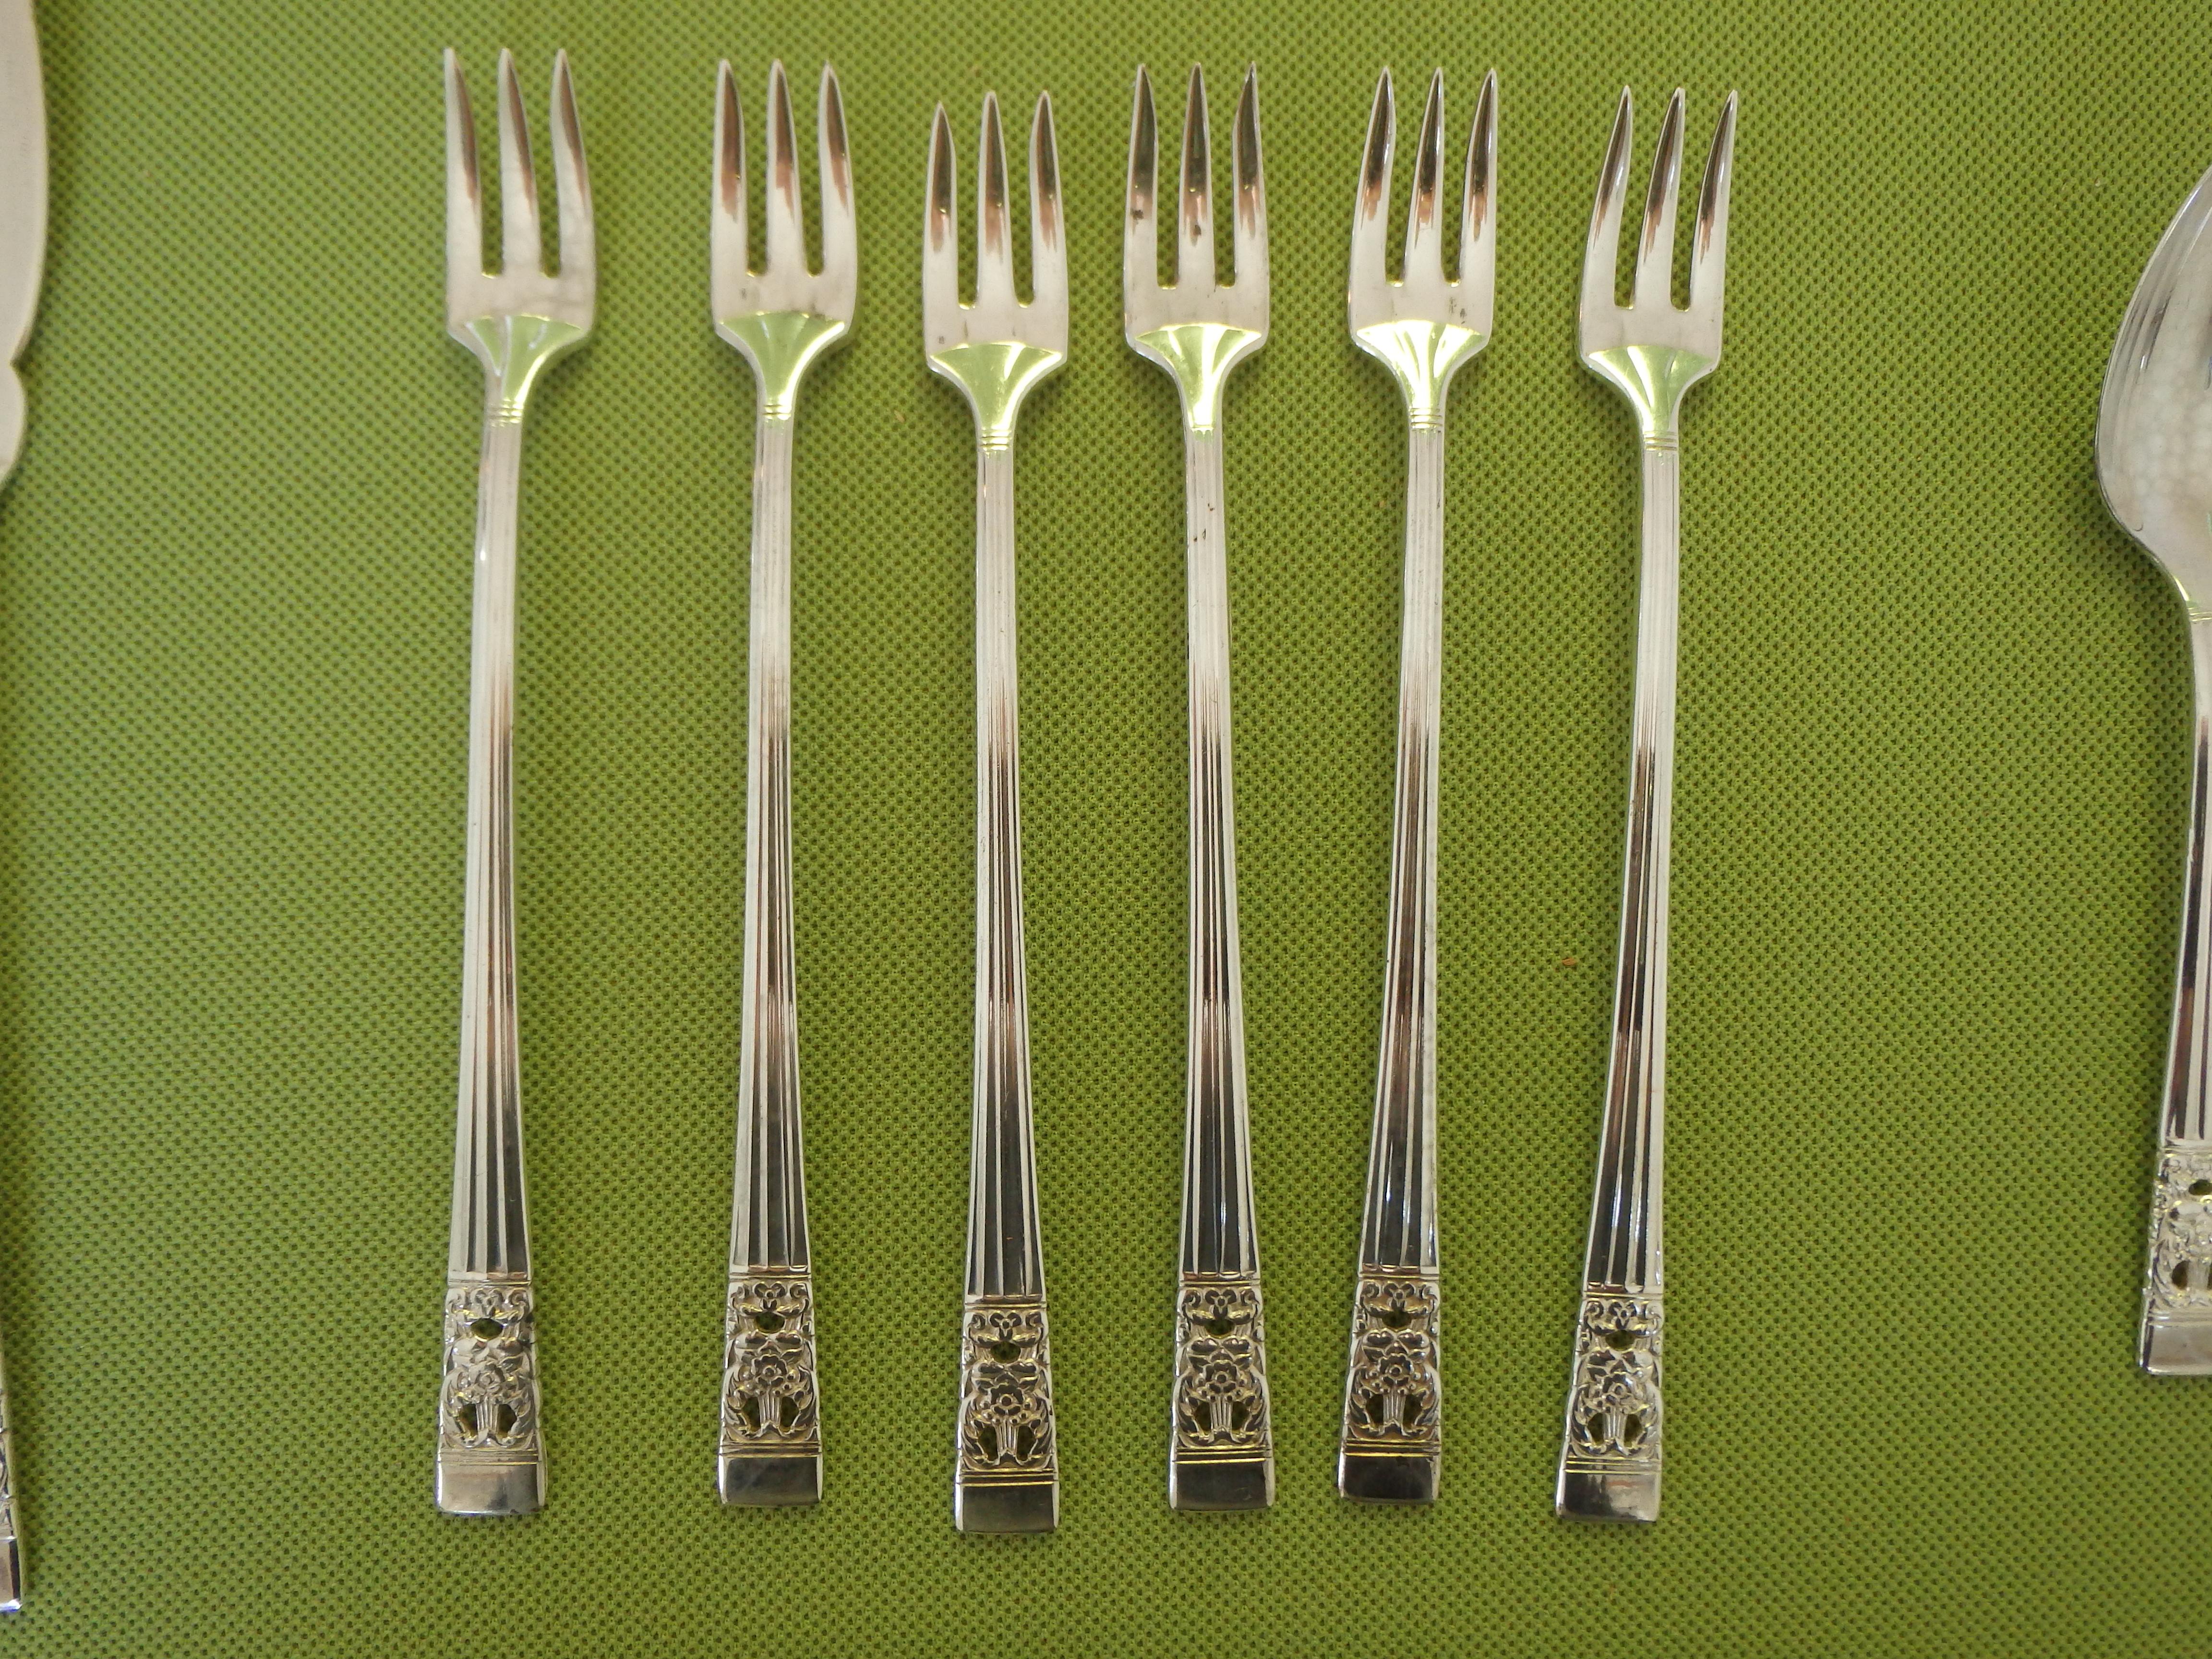 ONEIDA COMMUNITY Coronation Hampton Court 49 pieces table wear for 6 person plus a lot of serving pieces
6 knifes
6 spoons , tea spoons , mocha spoons
6 forks  3 are slightly smaller
6 olive forks
2 fish knifes
4 serving forks
4 serving spoons 
1